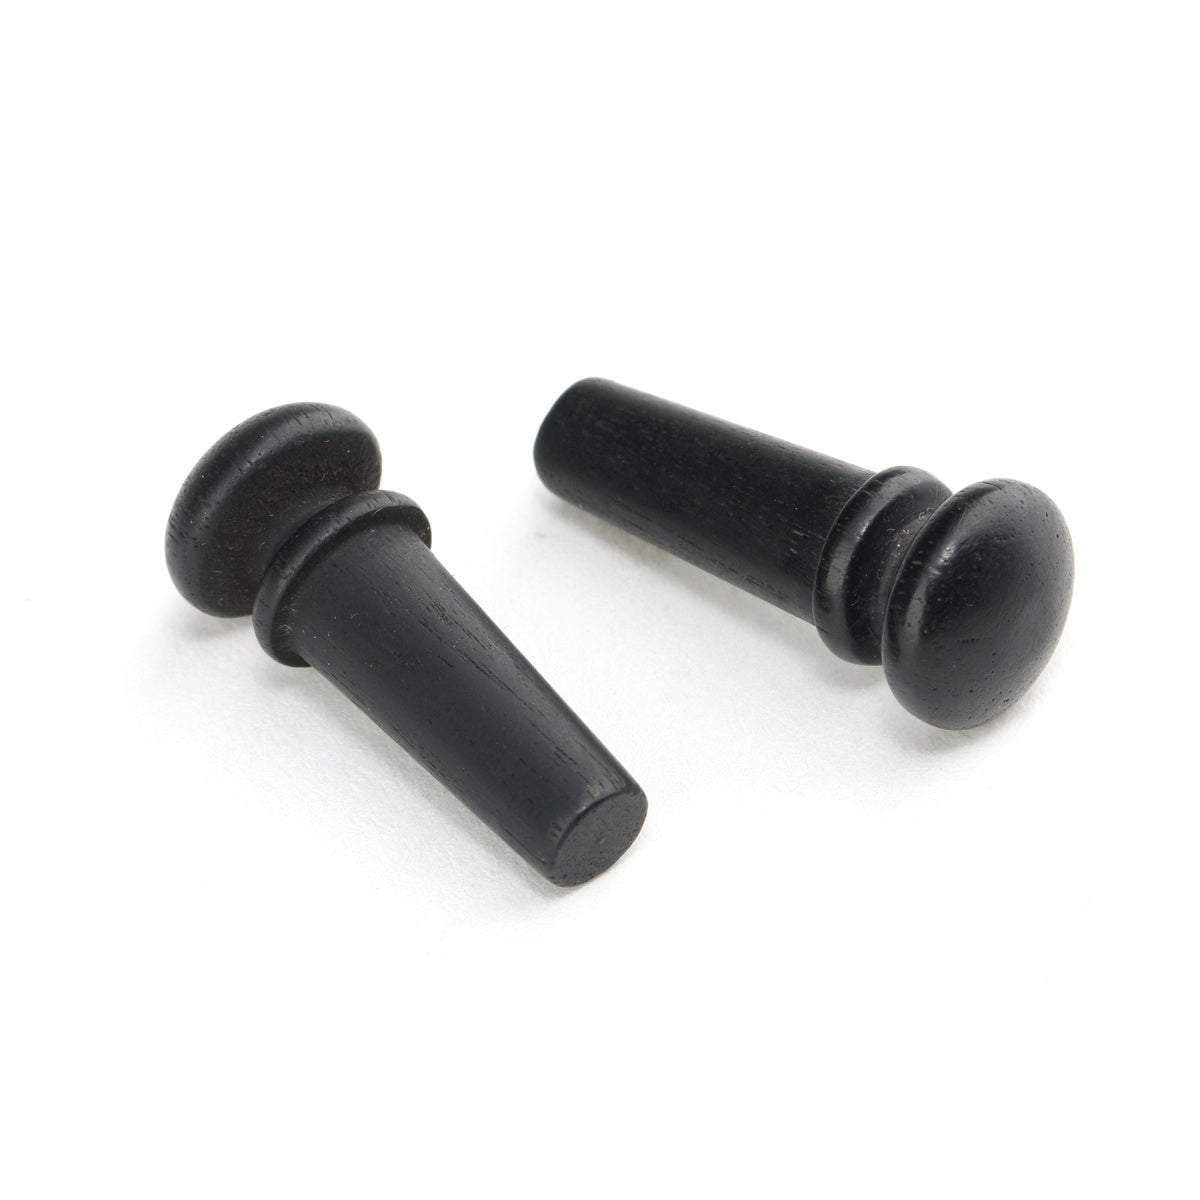 Musiclily Slotted Ebony Acoustic Guitar Endpin, Black (2 pieces)